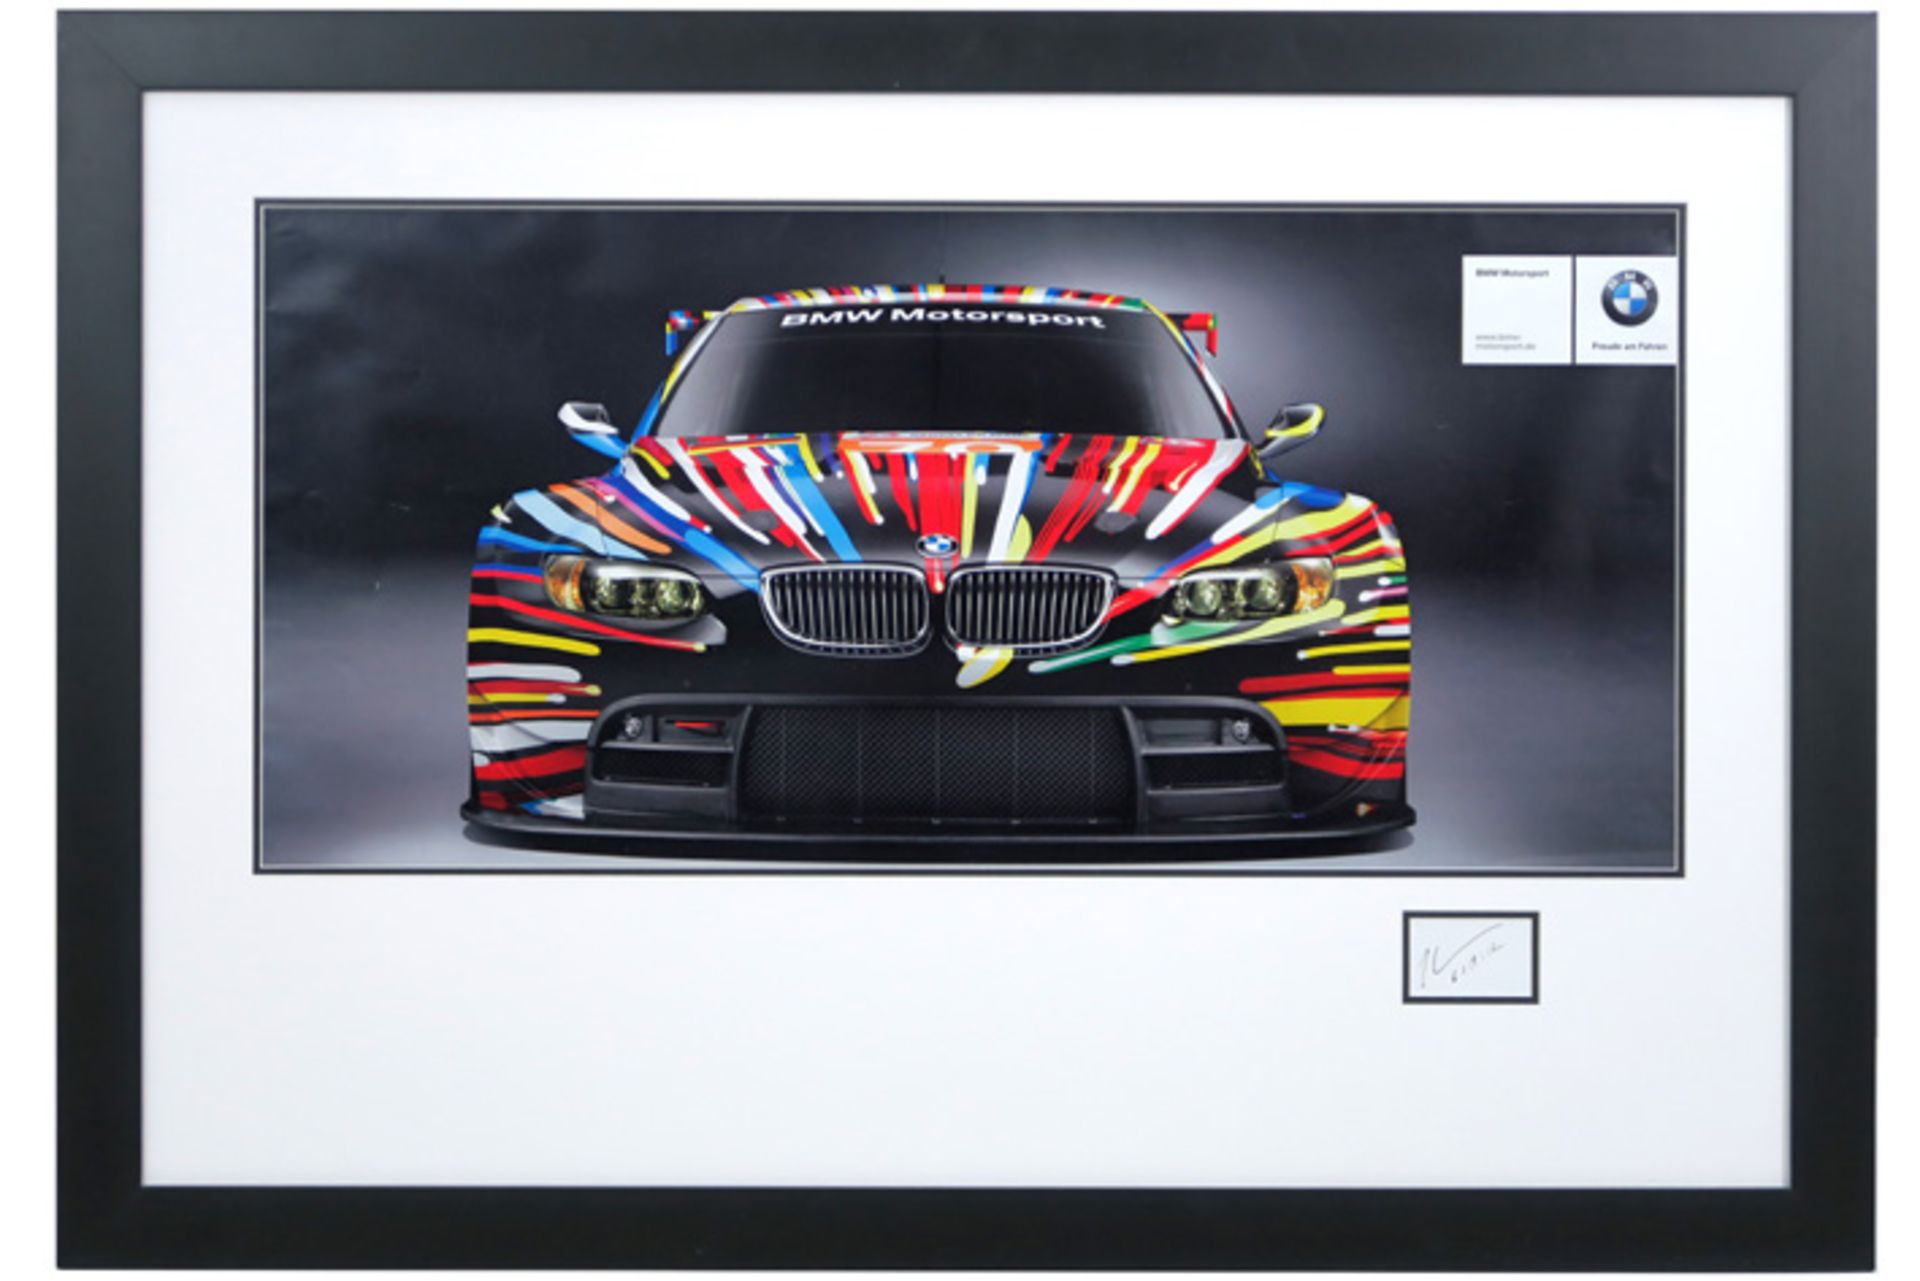 Jeff Koons handsigned and 6/19/(20)12 dated "BMW Art Car / BMW M3 GT2" offset print , one of the - Image 3 of 3